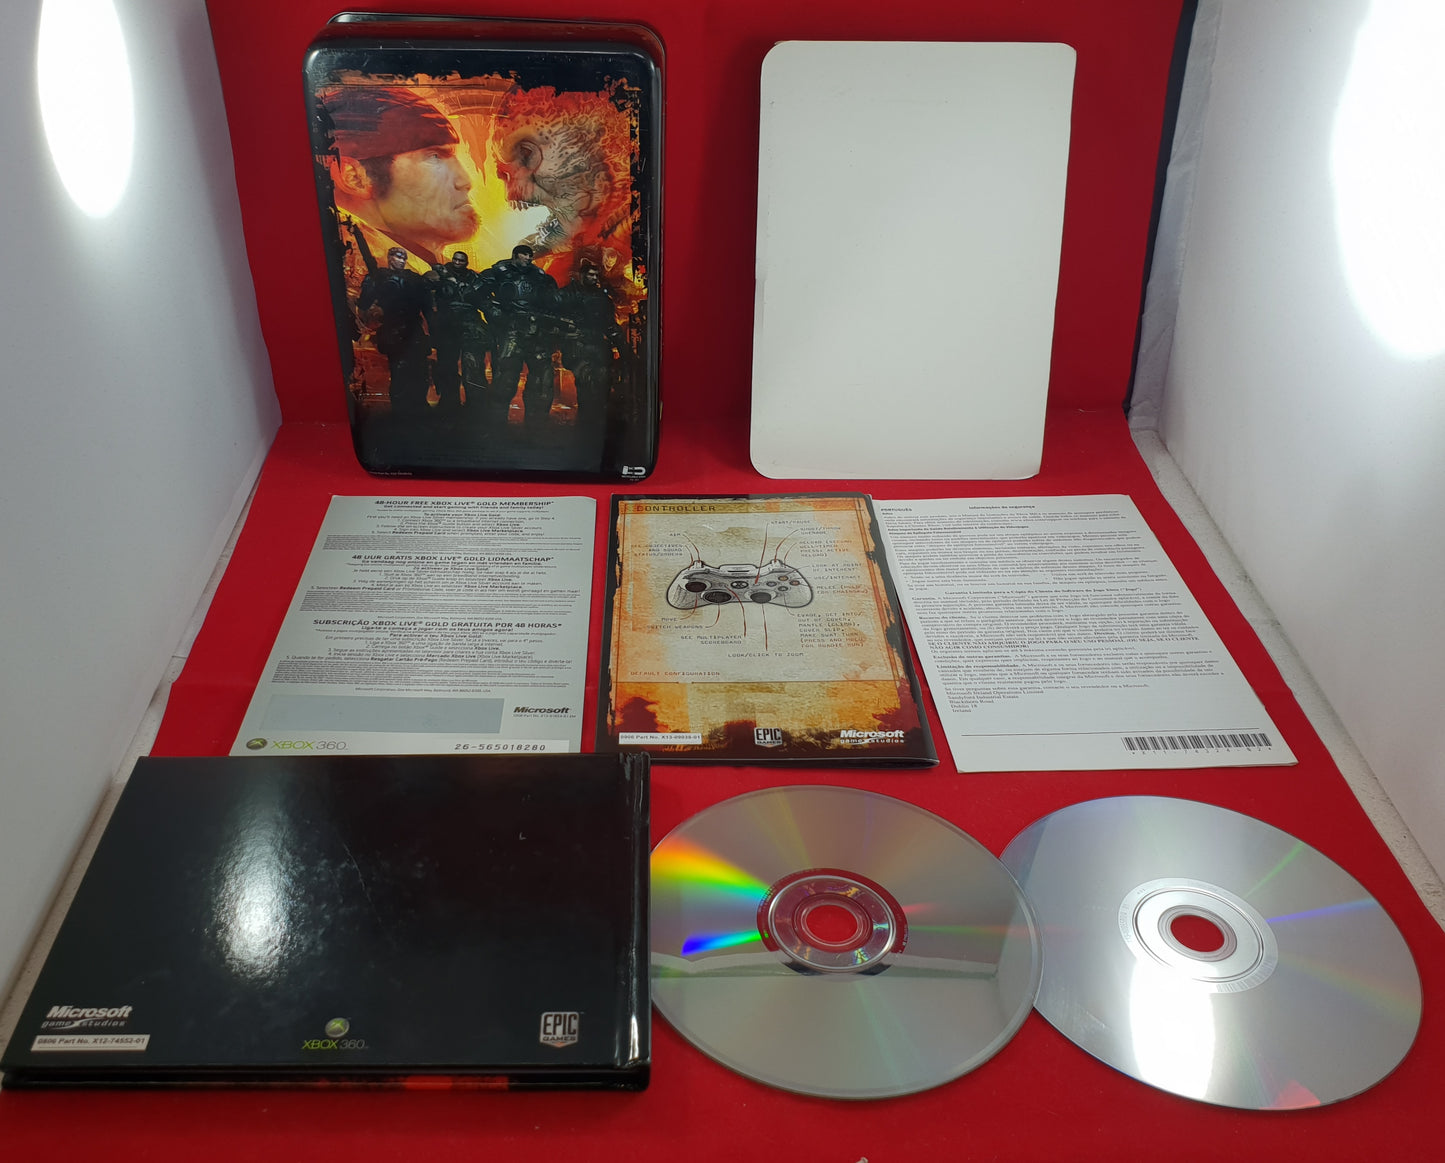 Gears of War Limited Edition Collectors Box Xbox 360 Game